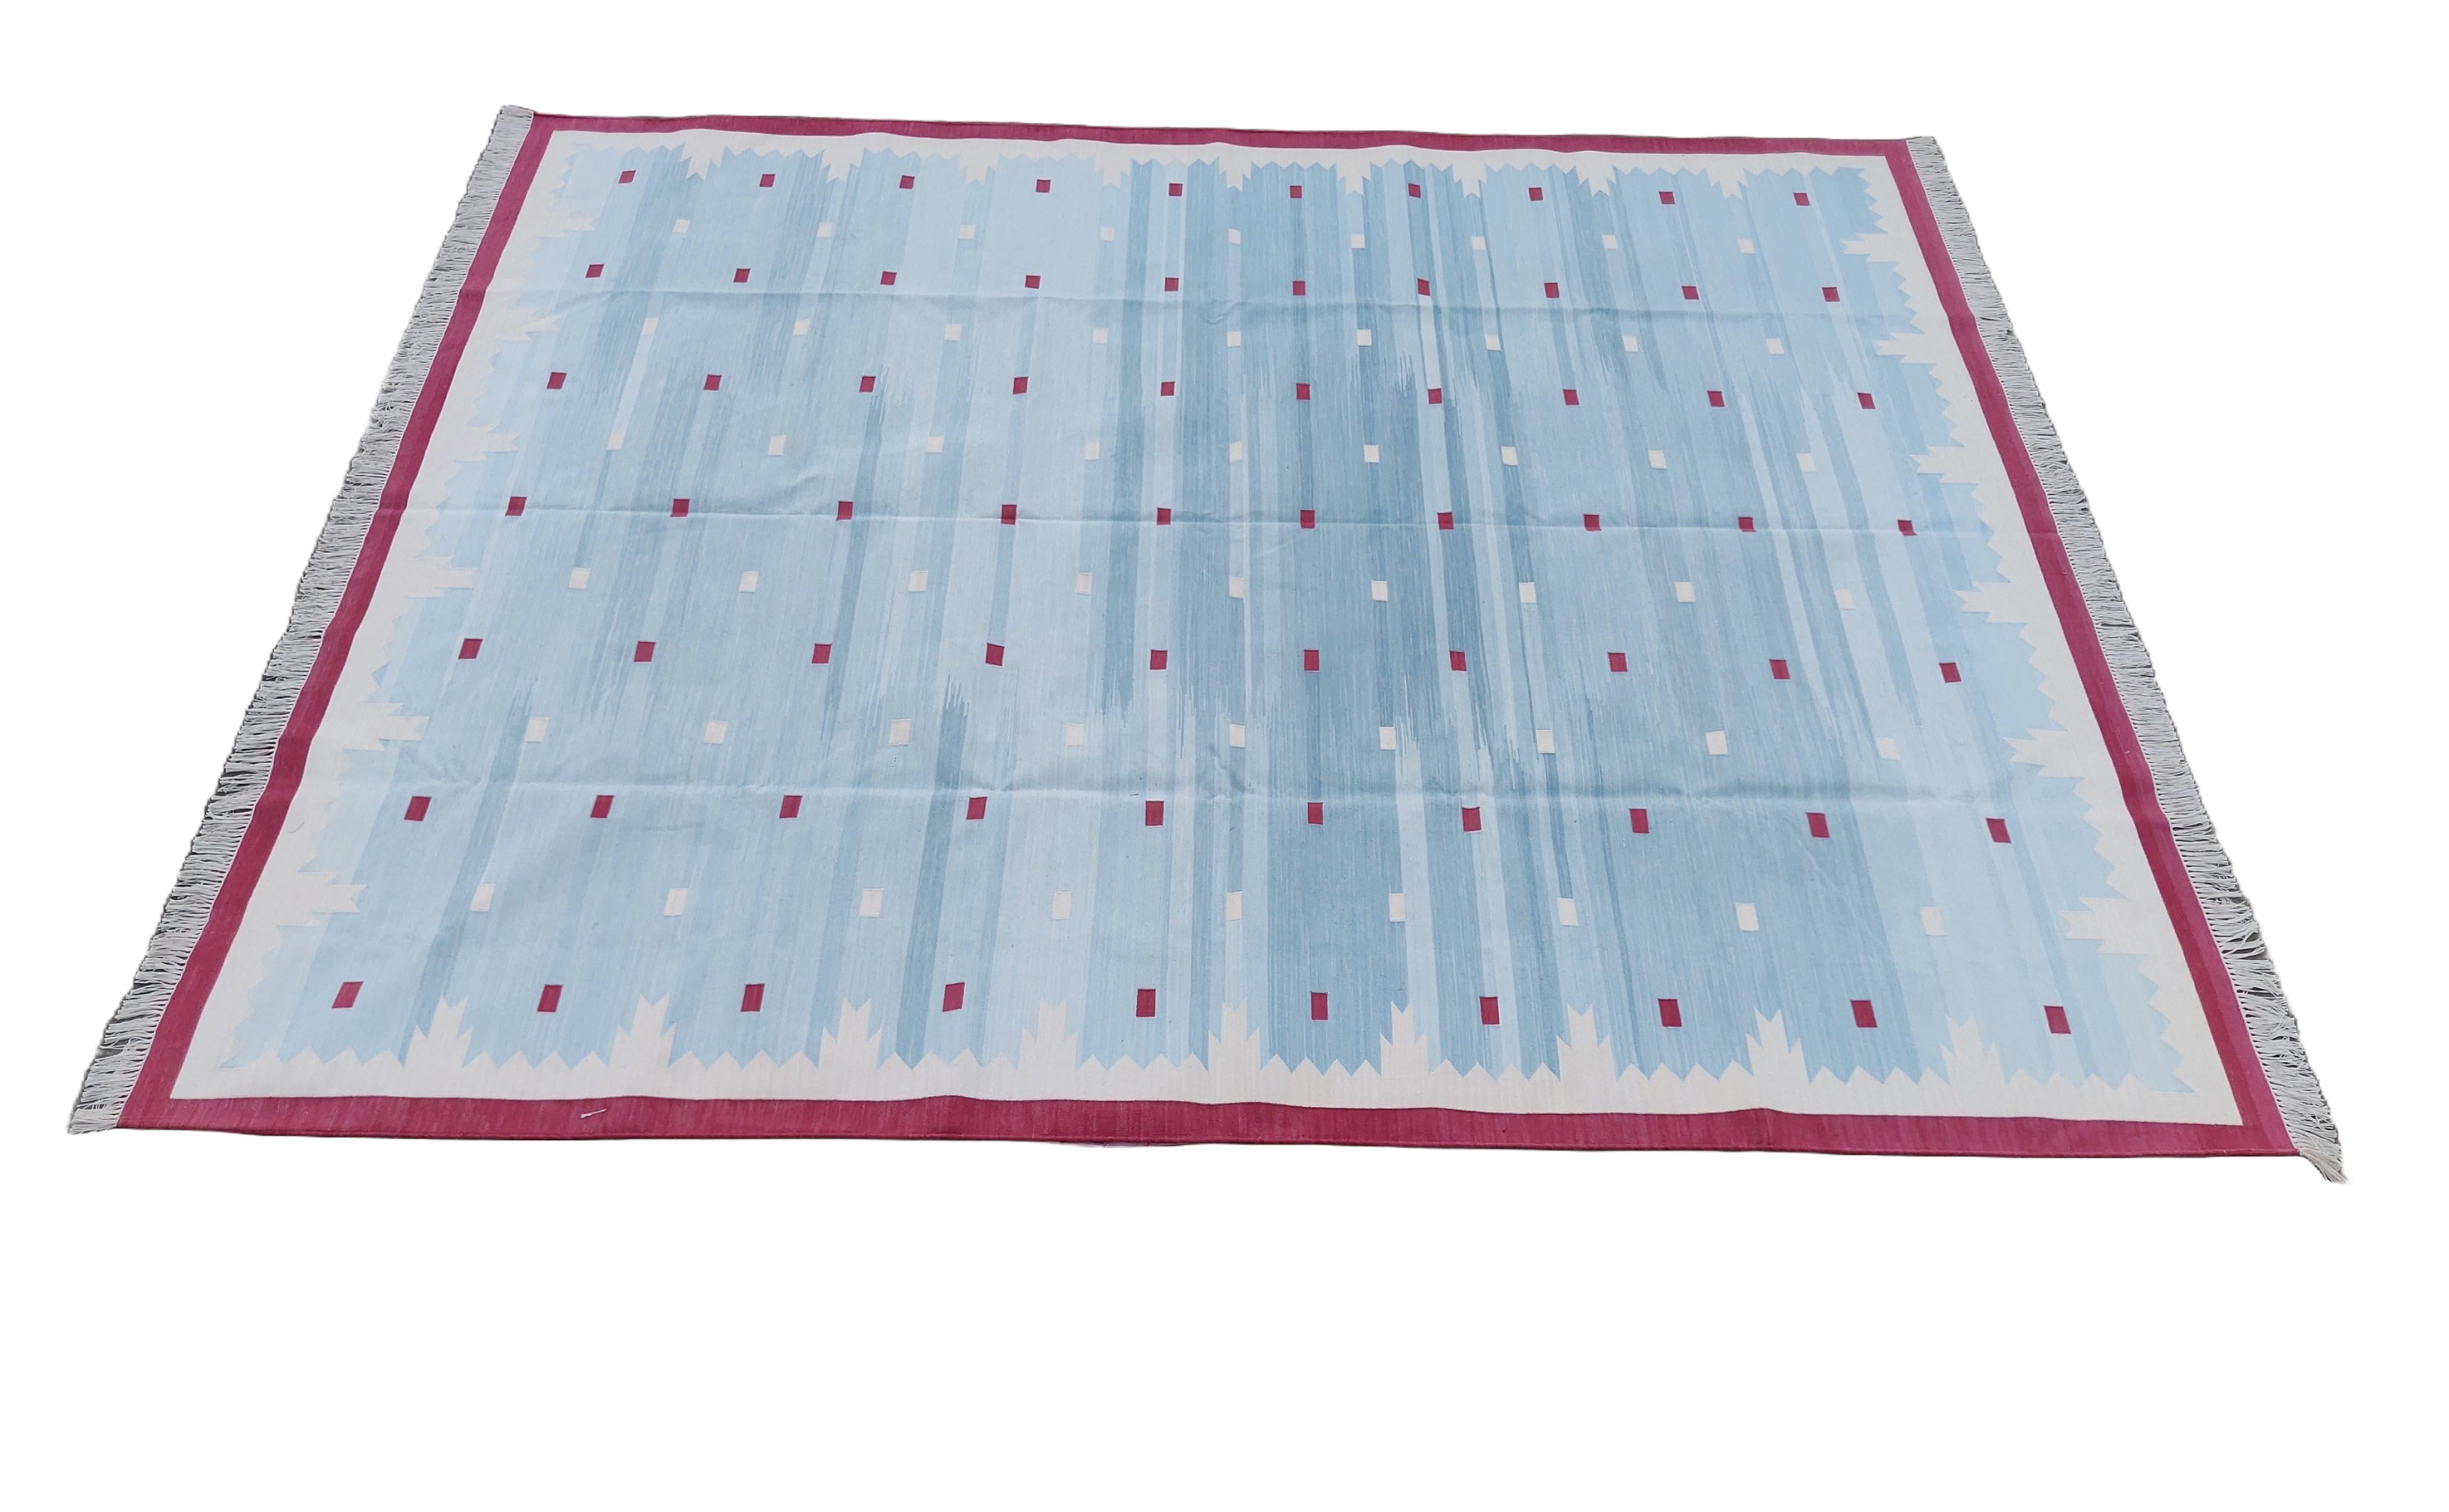 Cotton Vegetable Dyed Reversible Sky Blue And Pink Geometric Patterned Indian Rug - 8'x10'
These special flat-weave dhurries are hand-woven with 15 ply 100% cotton yarn. Due to the special manufacturing techniques used to create our rugs, the size